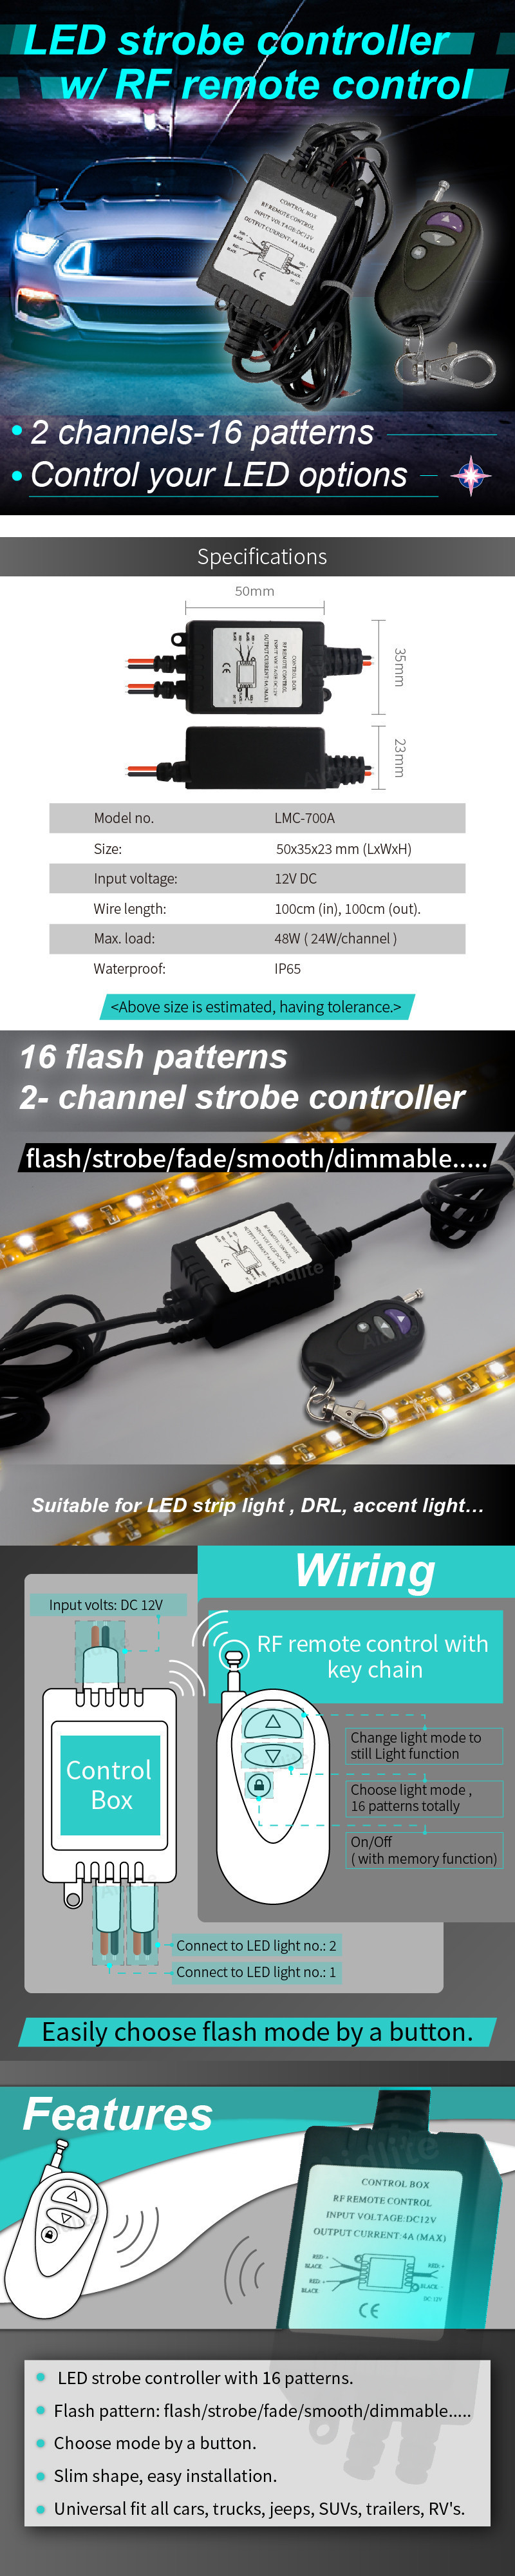 https://www.aidlite.com.tw/laravel-filemanager/photos/shares/Vehicle%20Accessory/12V%20RF%20Remote%20LED%20Controller%20with%202%20channel%2016%20modes%20Light%20-photo.jpg